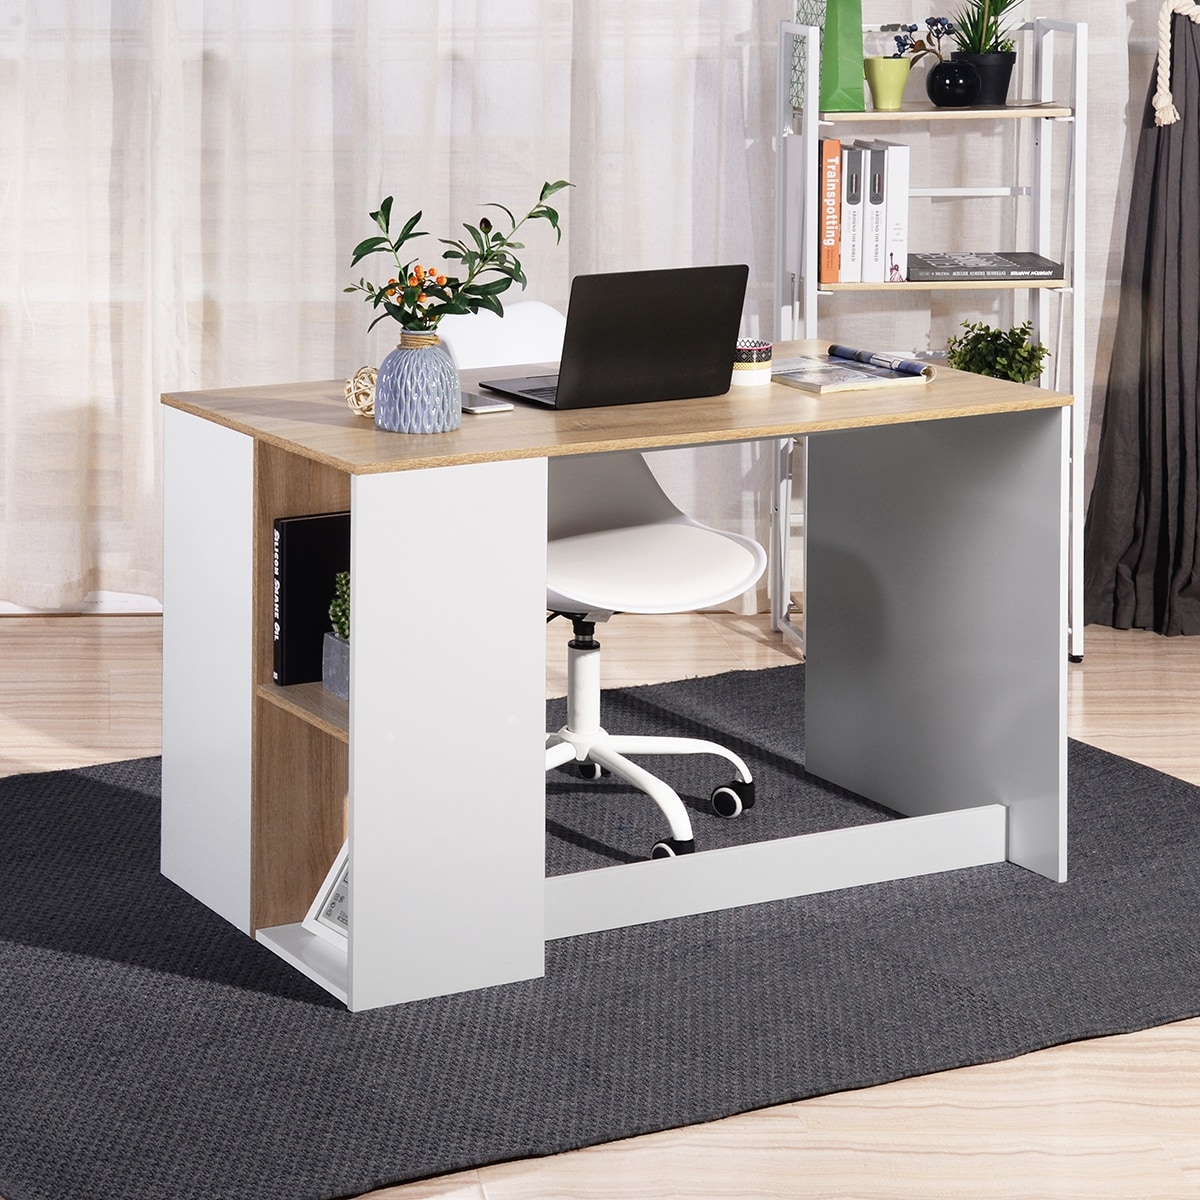 https://ak1.ostkcdn.com/images/products/is/images/direct/1ac8c418883b4c6dbcc2dcd366988539f4901739/Computer-Desk-with-5-Storage-Shelves.jpg